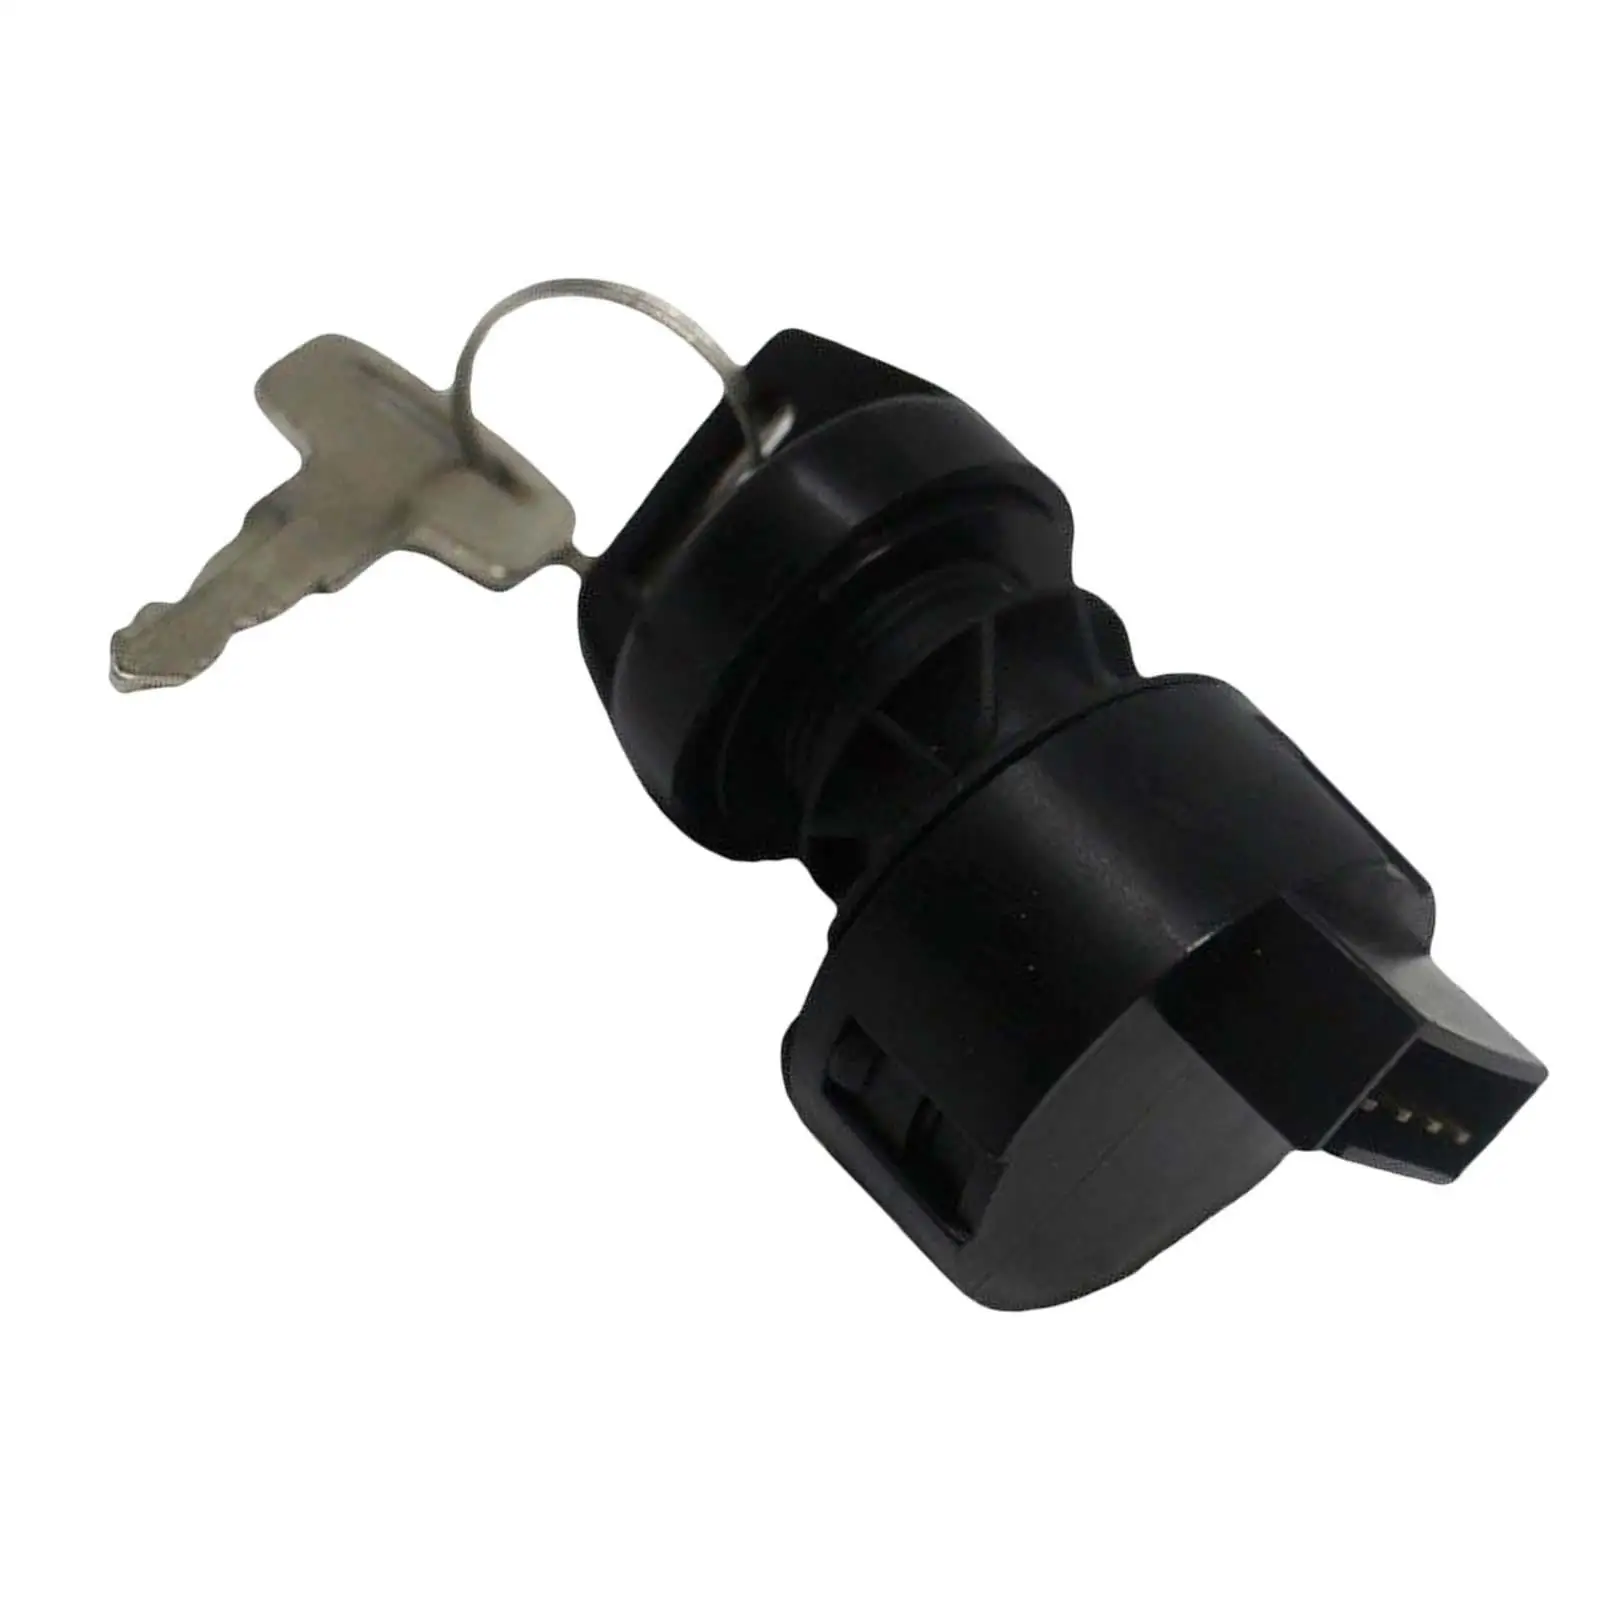 Ignition Switch Lock Accessory Replacement with 2 Keys Easy to Install Premium Parts Professional for 335 400 500 600